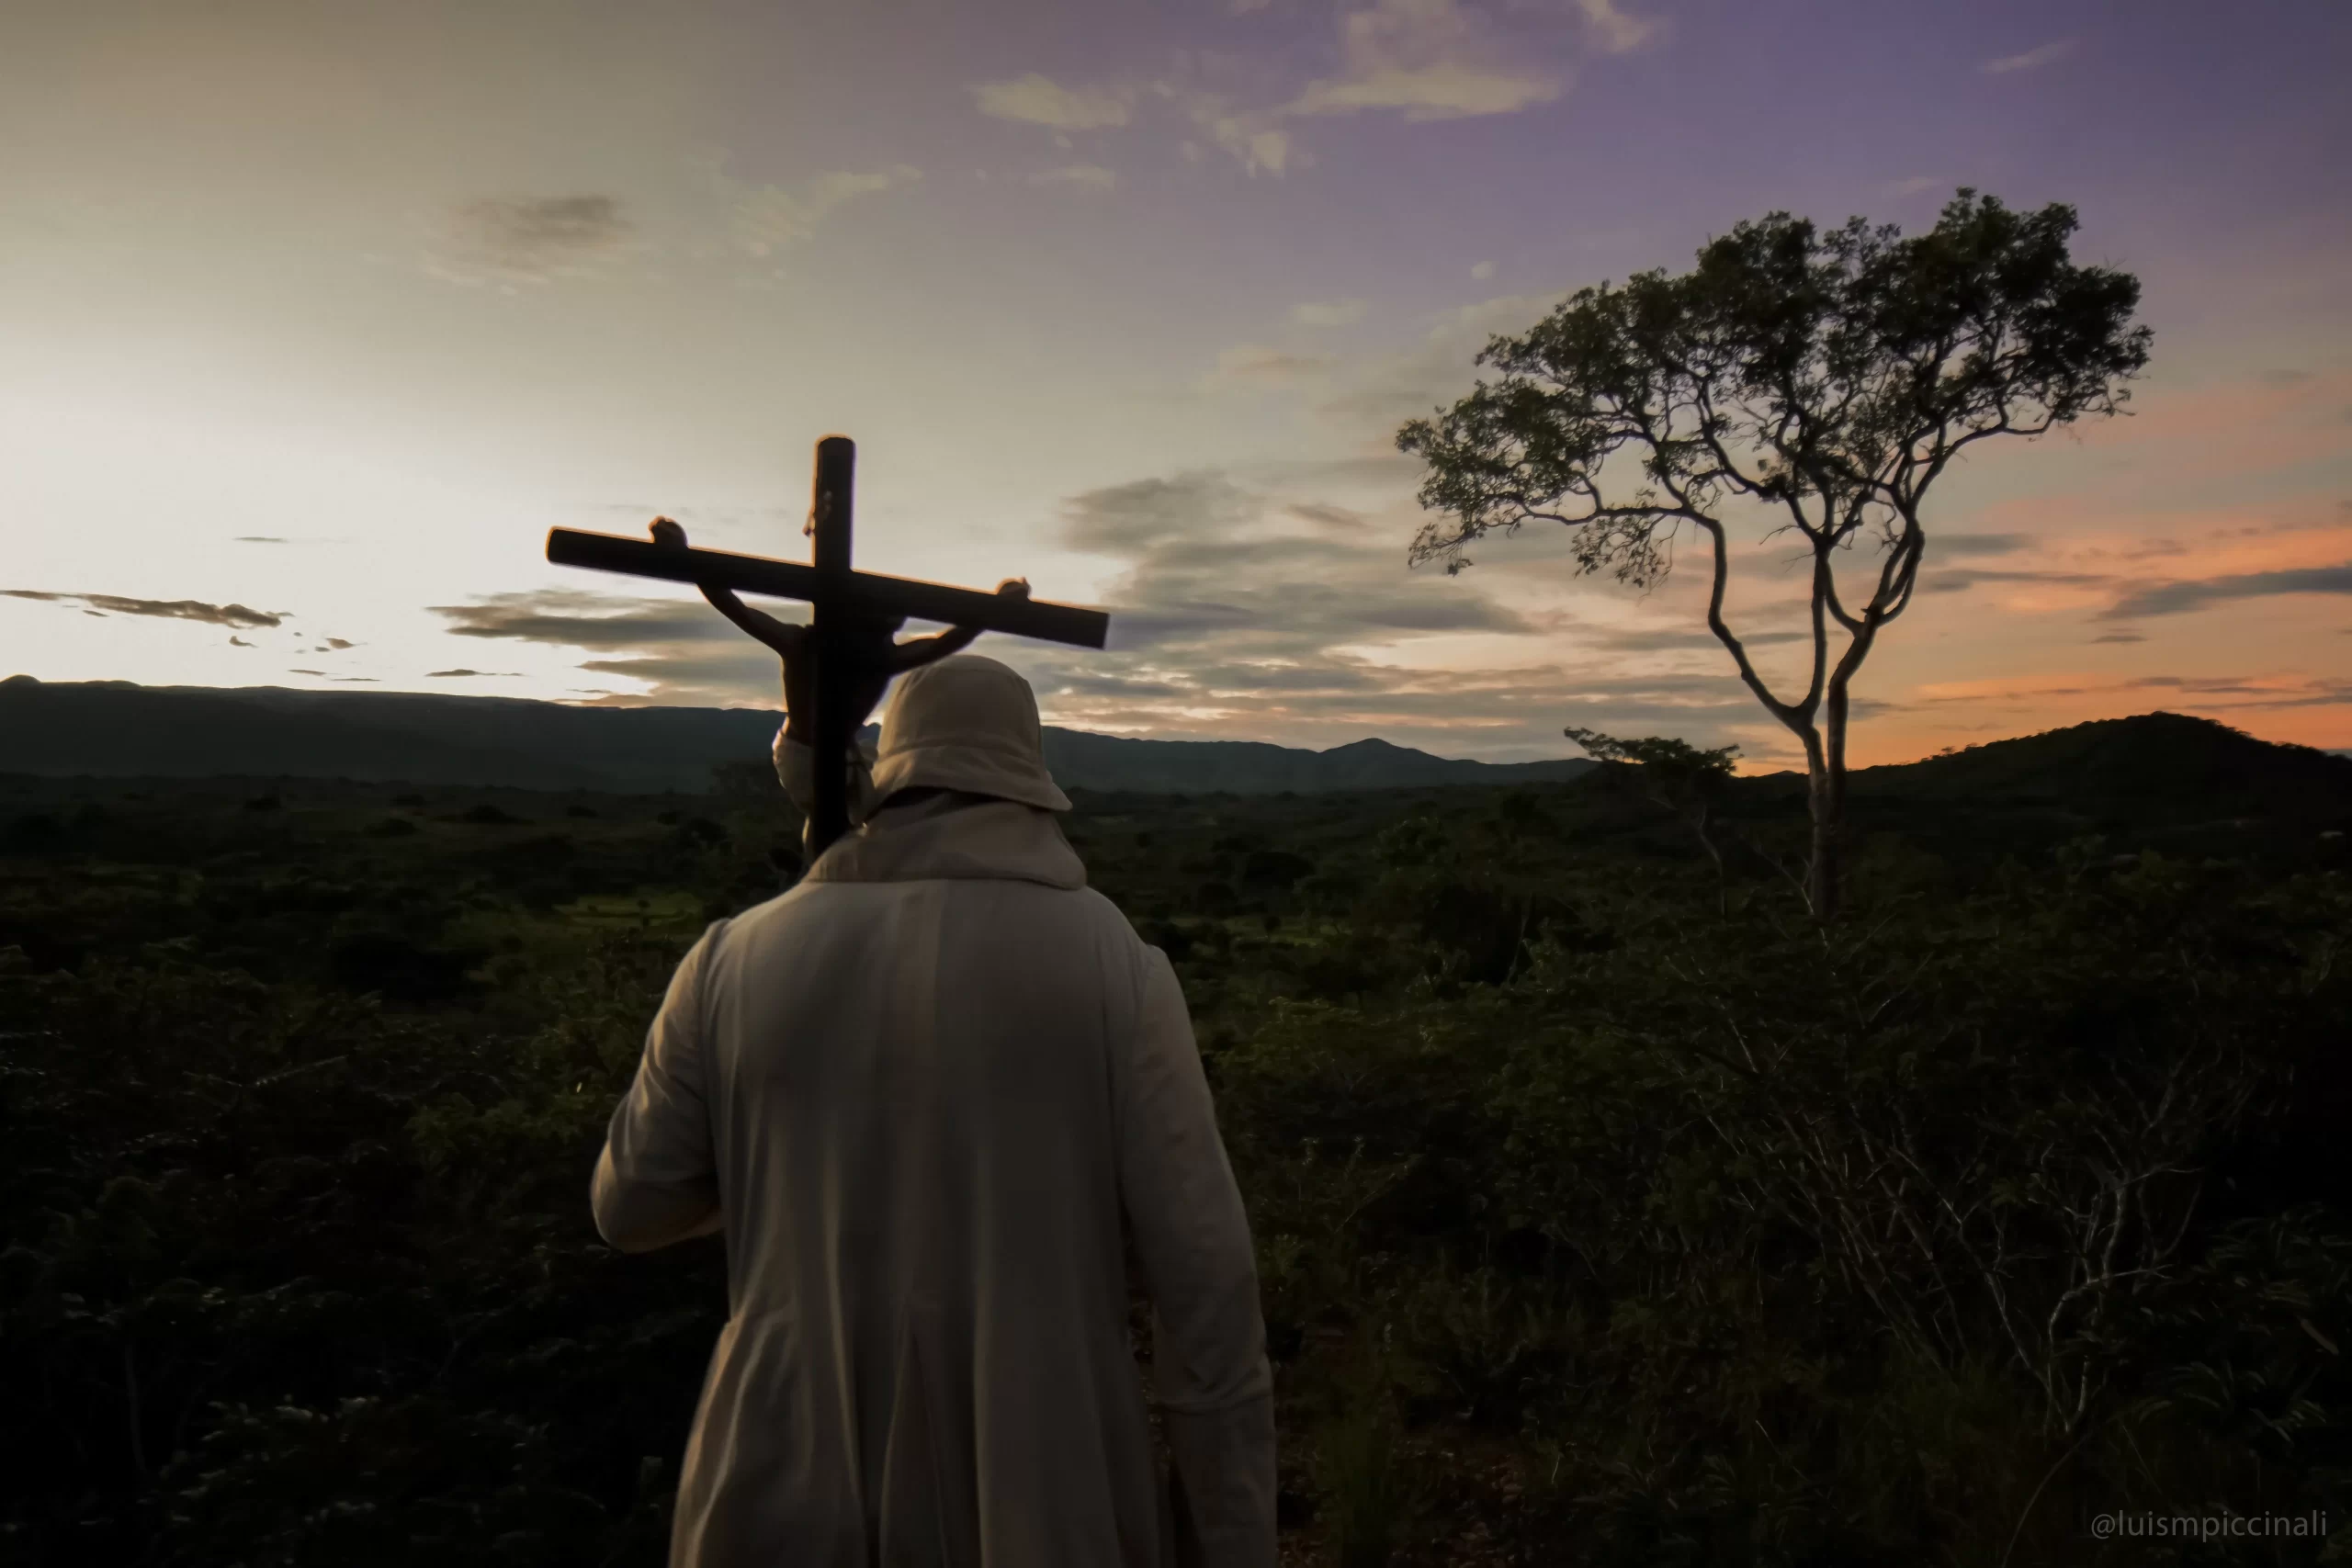 Father Federico Highton is one of two Argentine priests who in 2015 founded the Order of St. Elijah, whose motto is “Through my God I shall go over a wall,” which comes from Psalm 17. Credit: Luis M. Piccinali